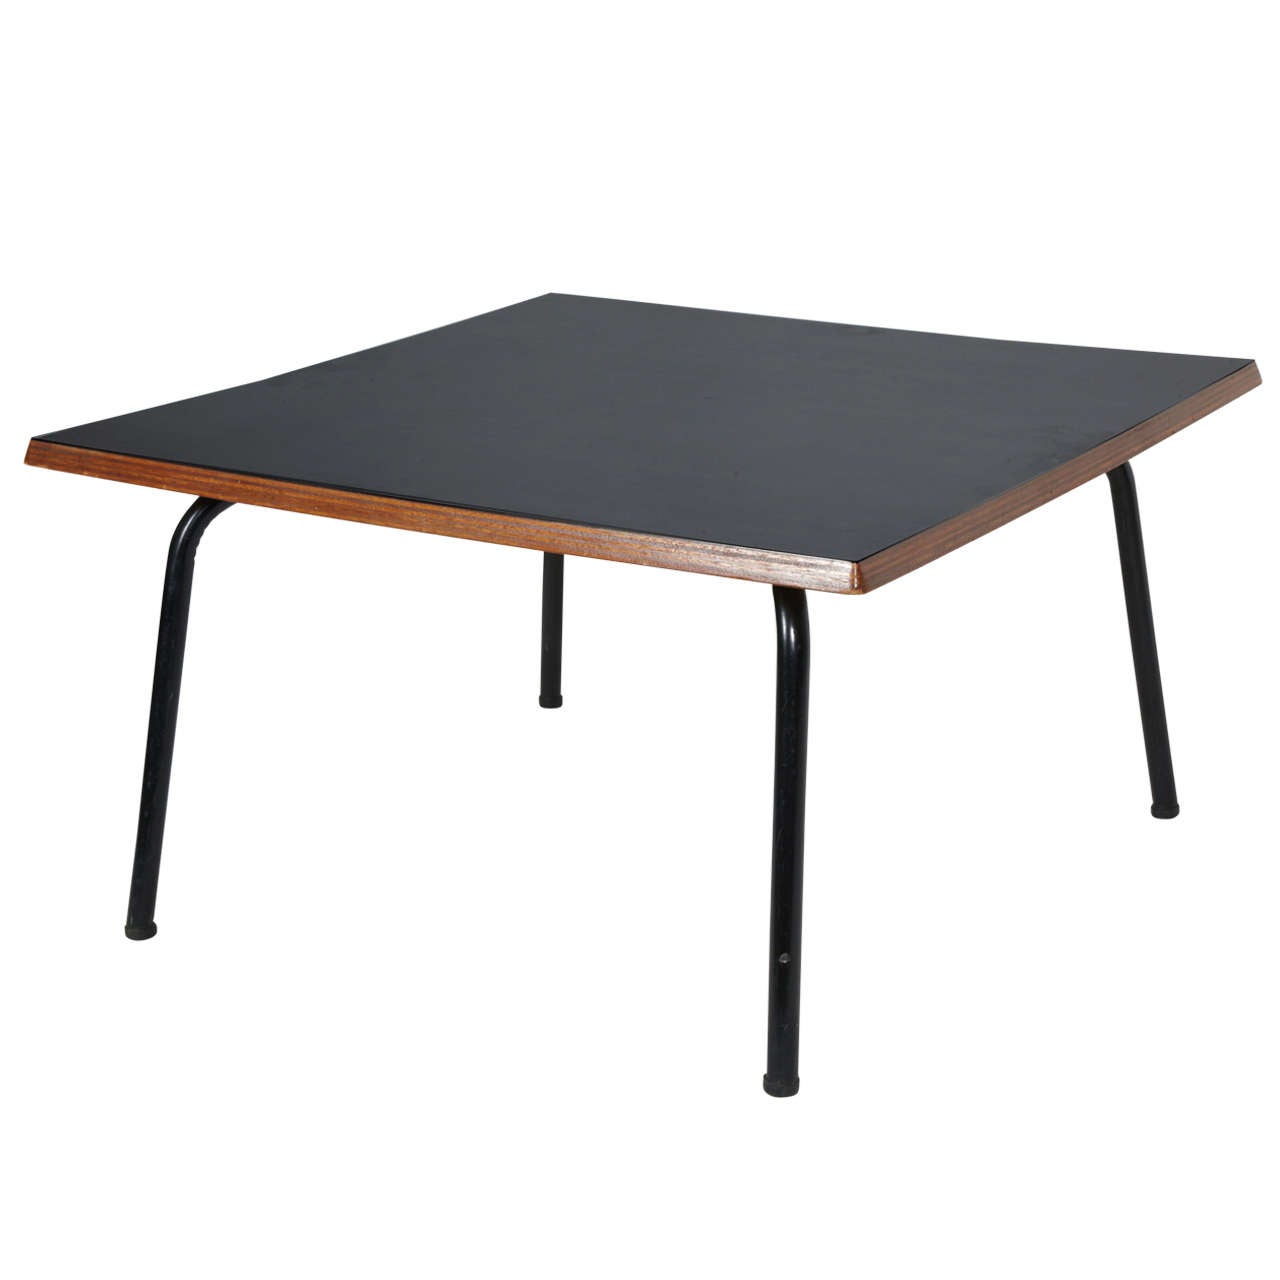 Charlotte Perriand, Square Coffee Table, 1953 For Sale